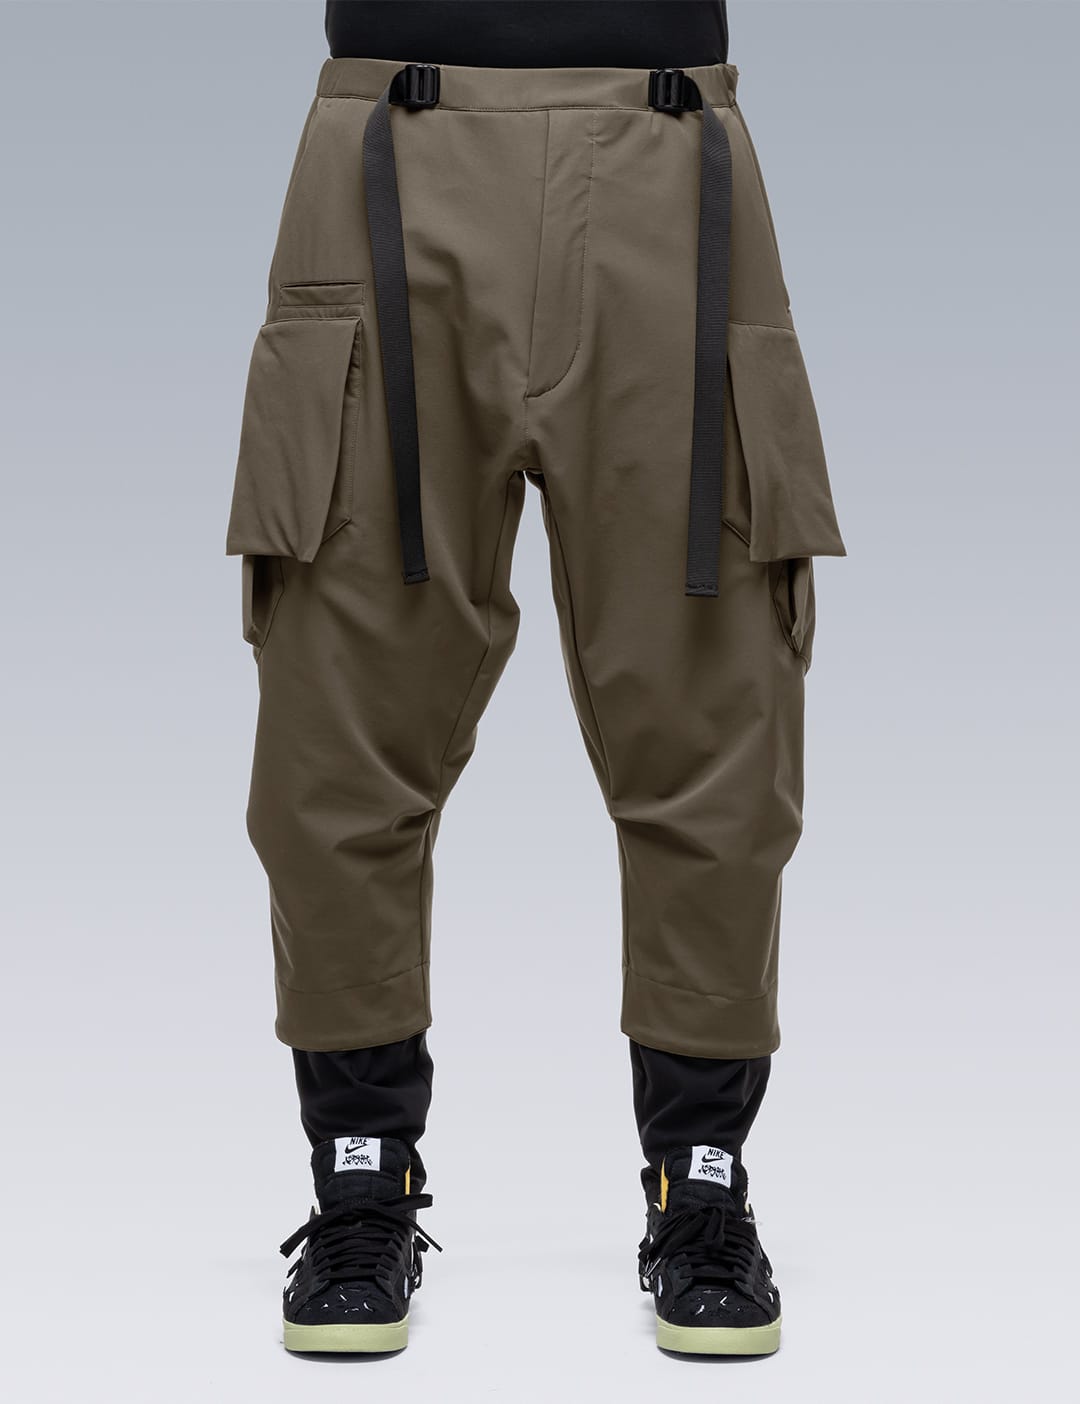 ACRONYM - J1A-GTKP | HBX - Globally Curated Fashion and Lifestyle 